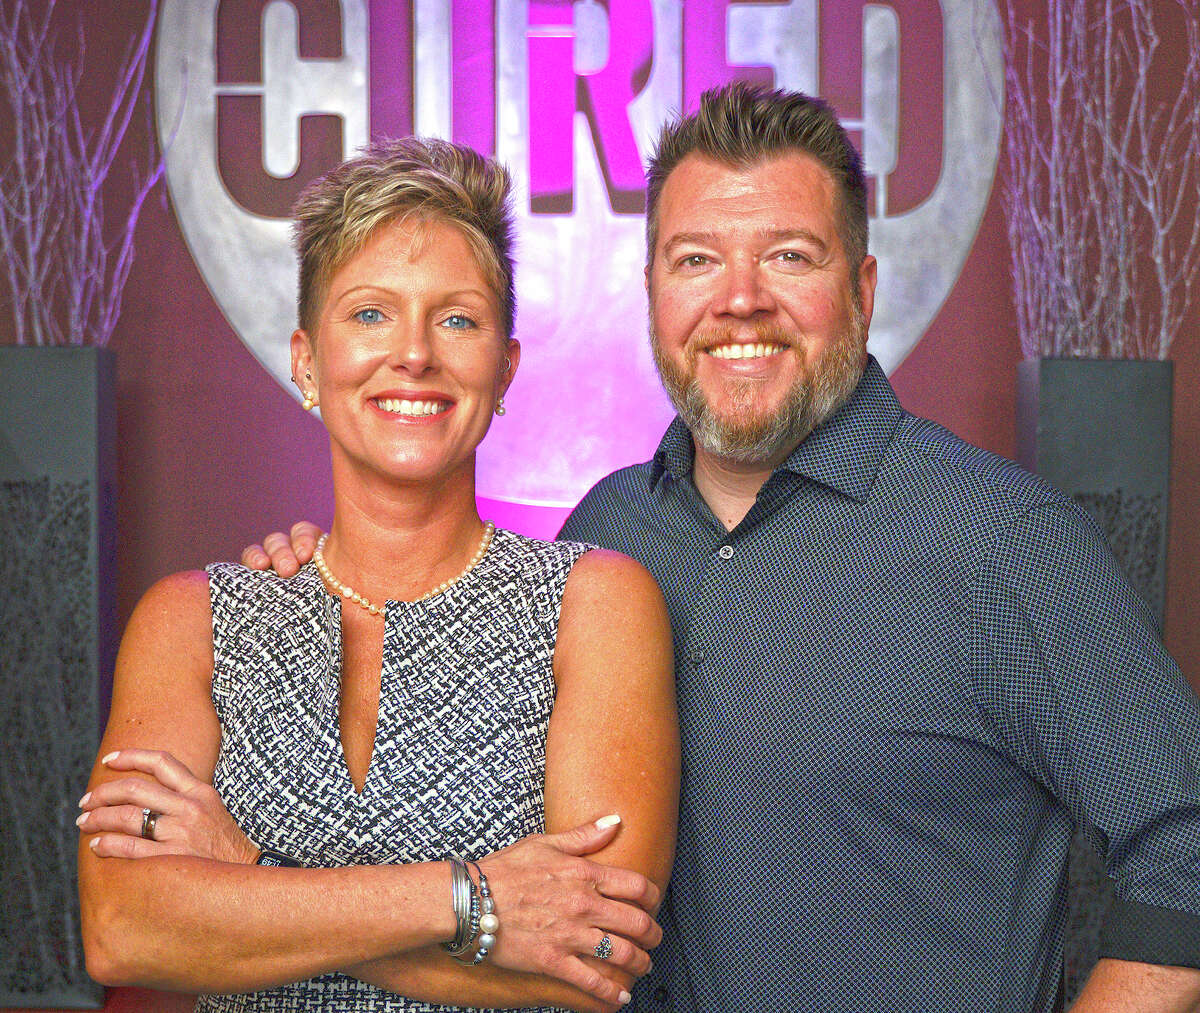 Melissa and Brian Reilly, owners of Cured Catering, said they plan to move their catering operations to the former MacMurray College campus. The company envisions having space to host events in the future.